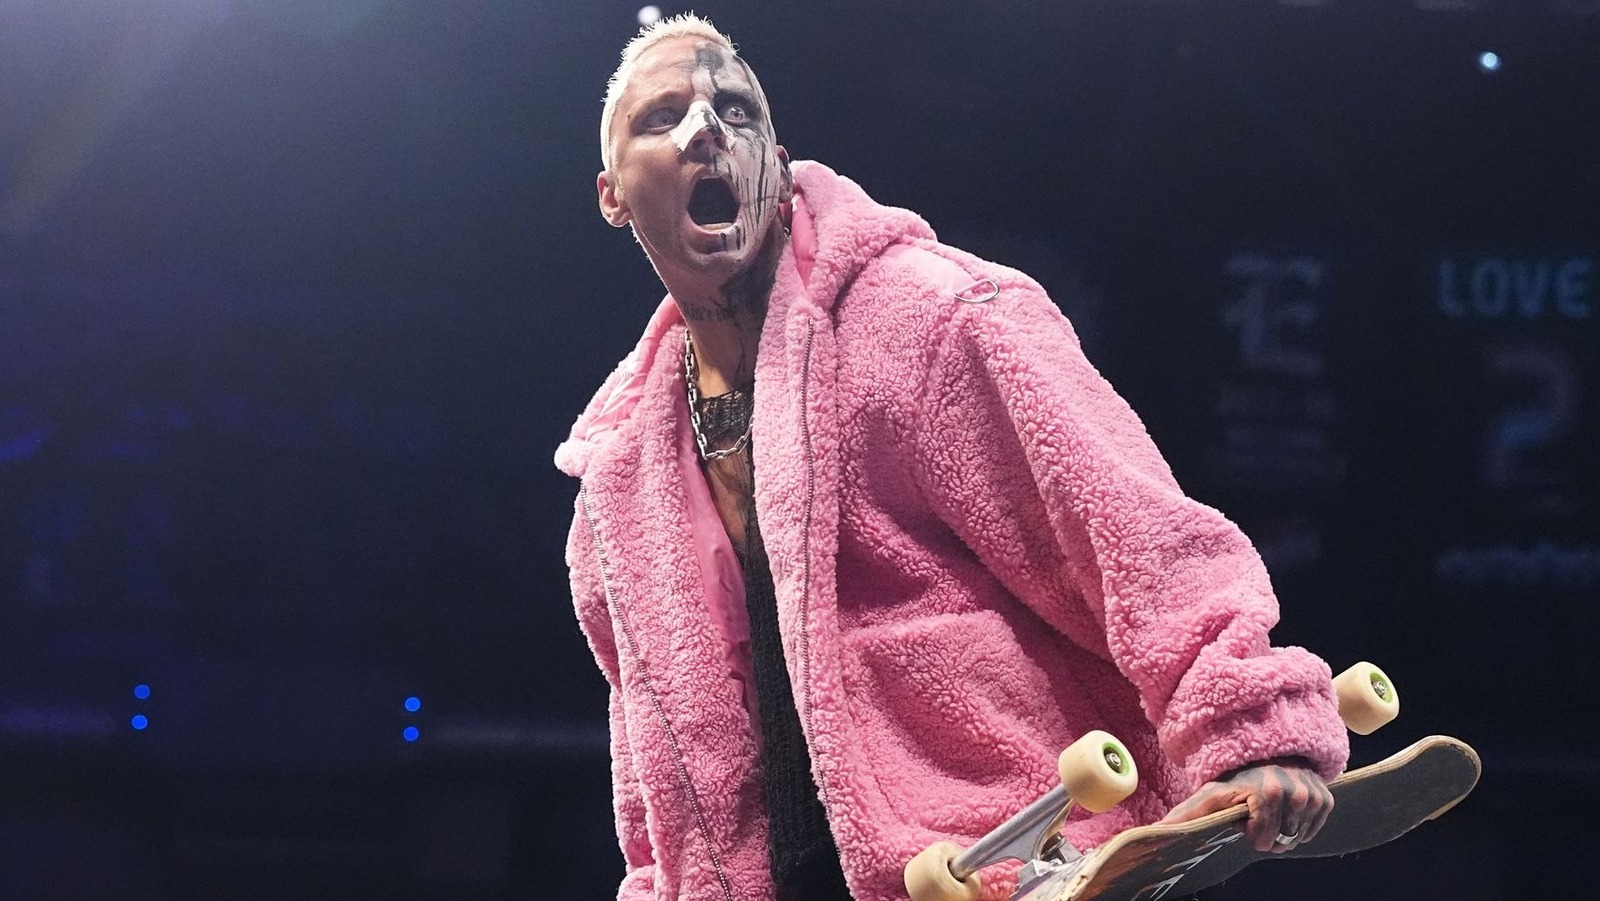 Tommy Dreamer Reacts To Darby Allin's Return On AEW Dynamite